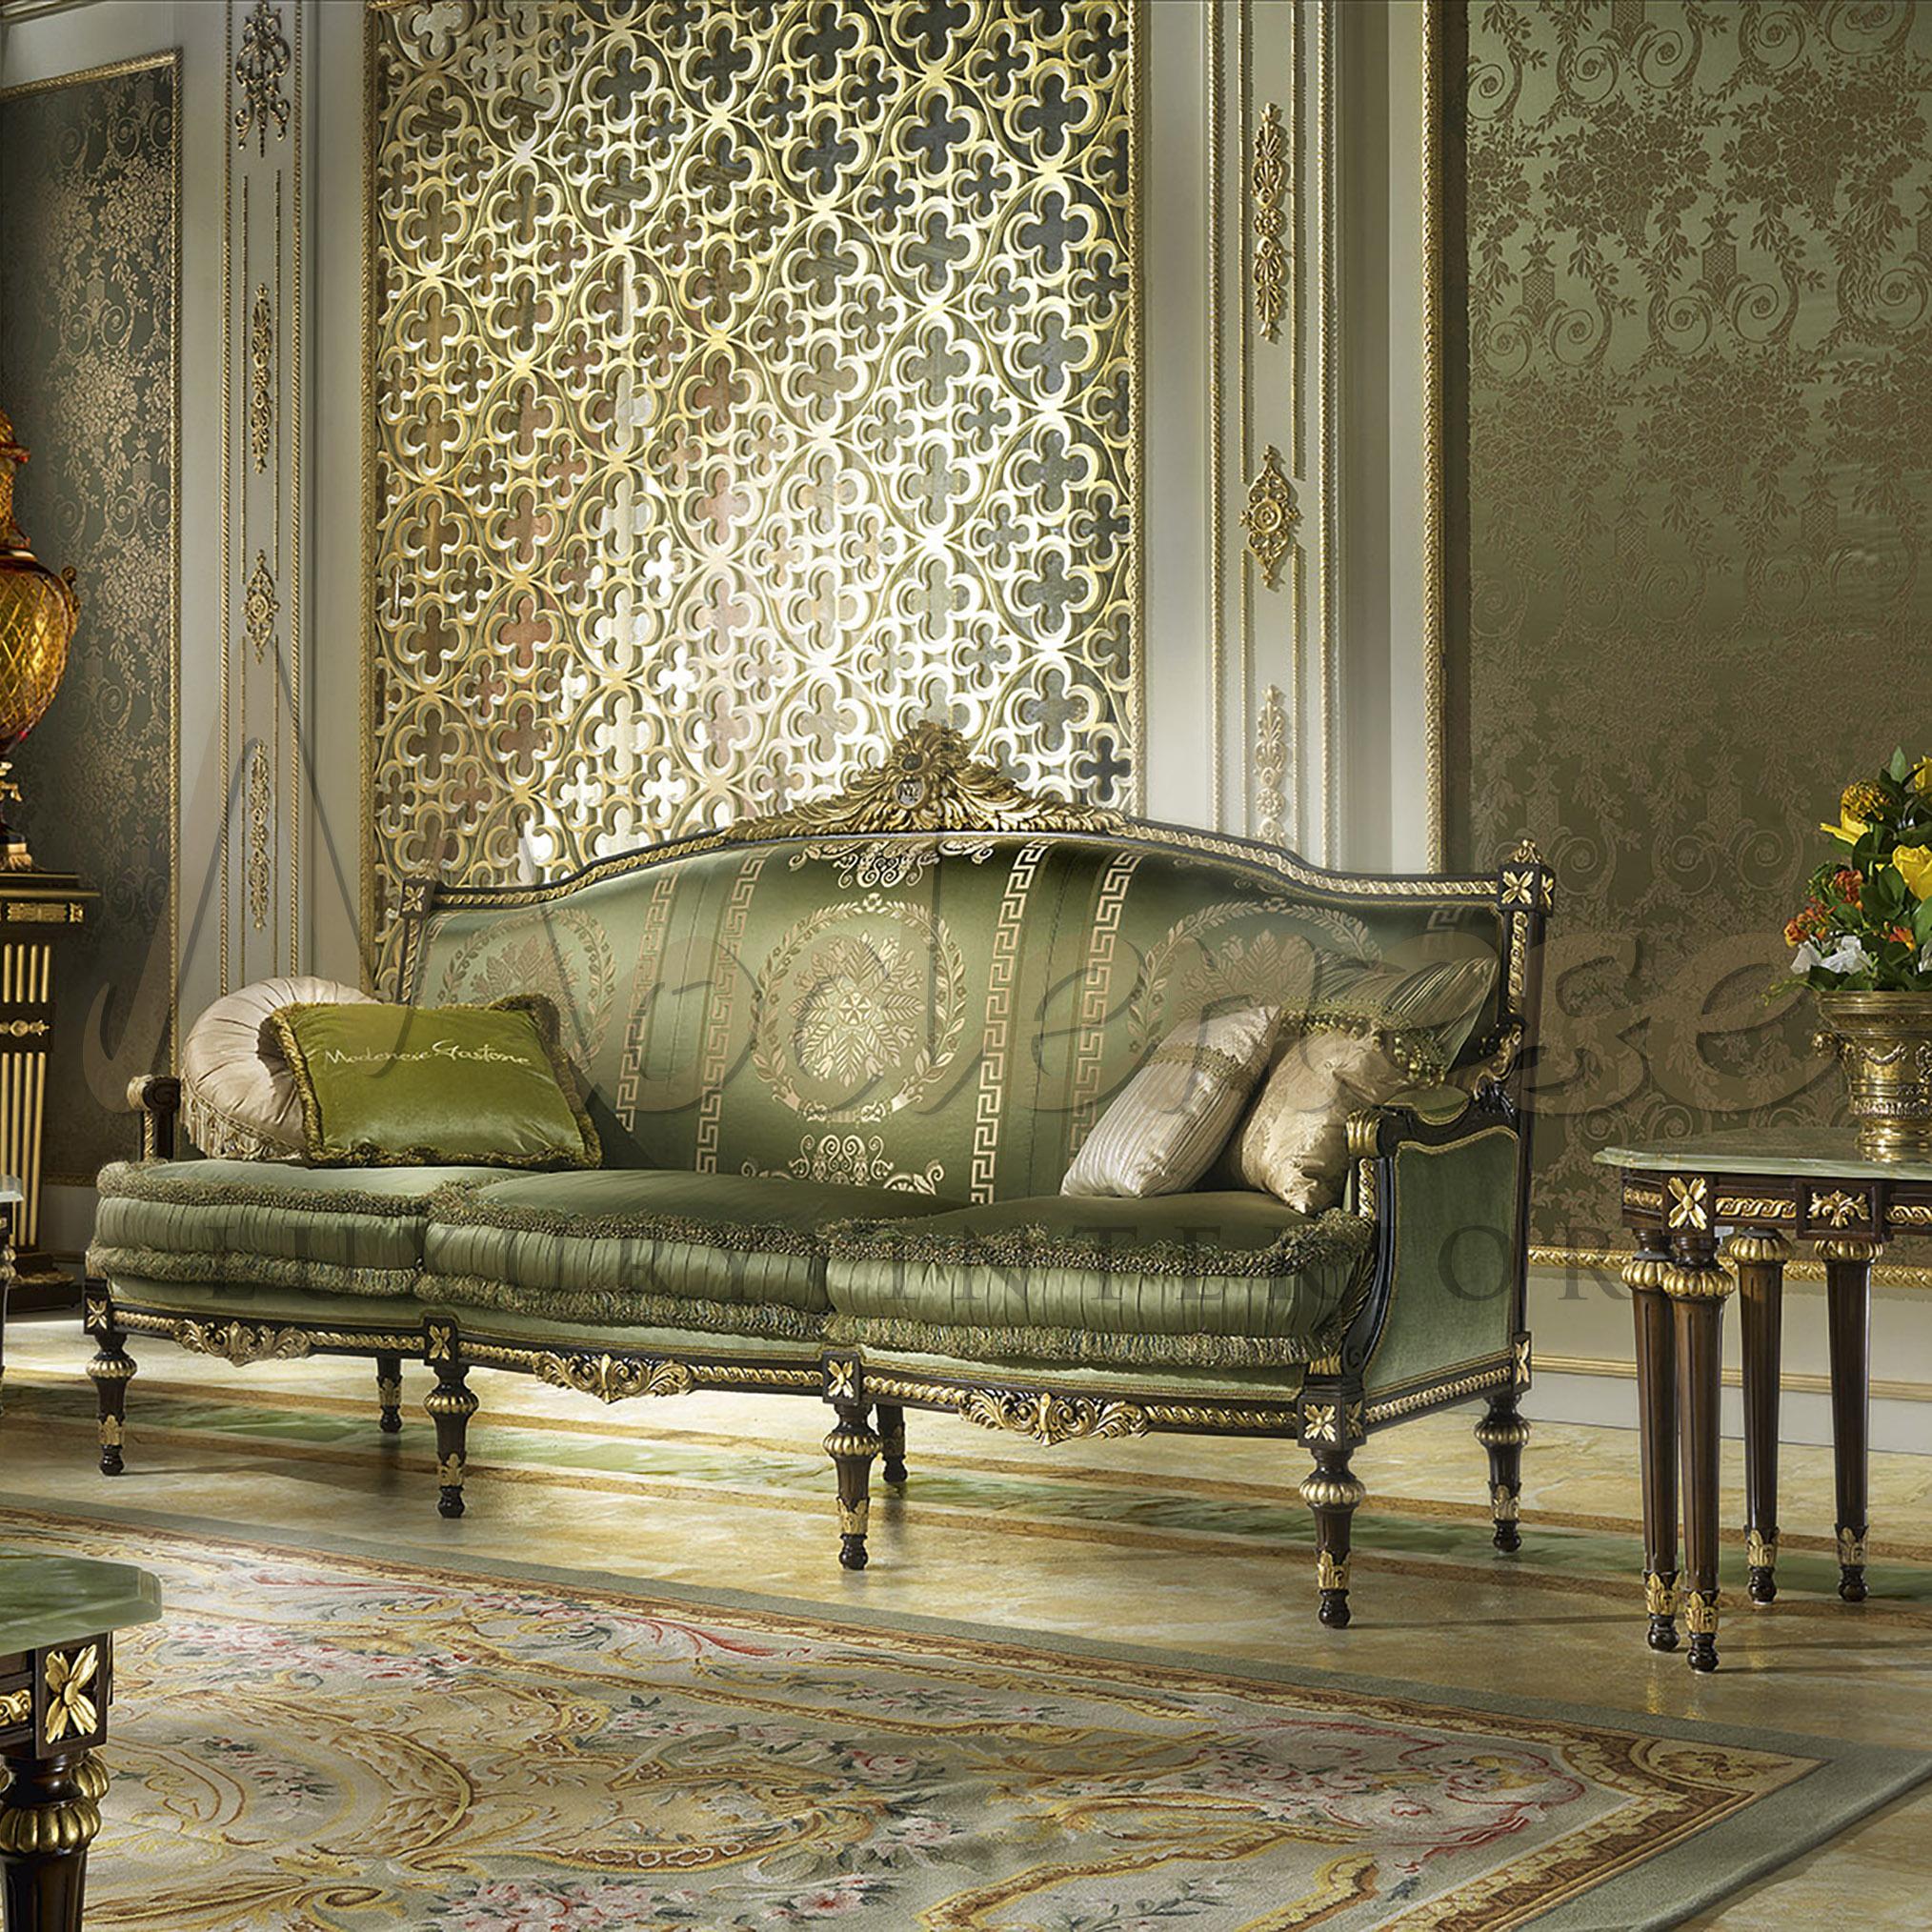 Novelty Italian sofa sets in classic victorian style, this luxurious three seater sofa, upholstered with the luxe plush velvety fabric. The highest quality blend of fabric in the timeless green hue, with the elegant dash of gold design. The luscious